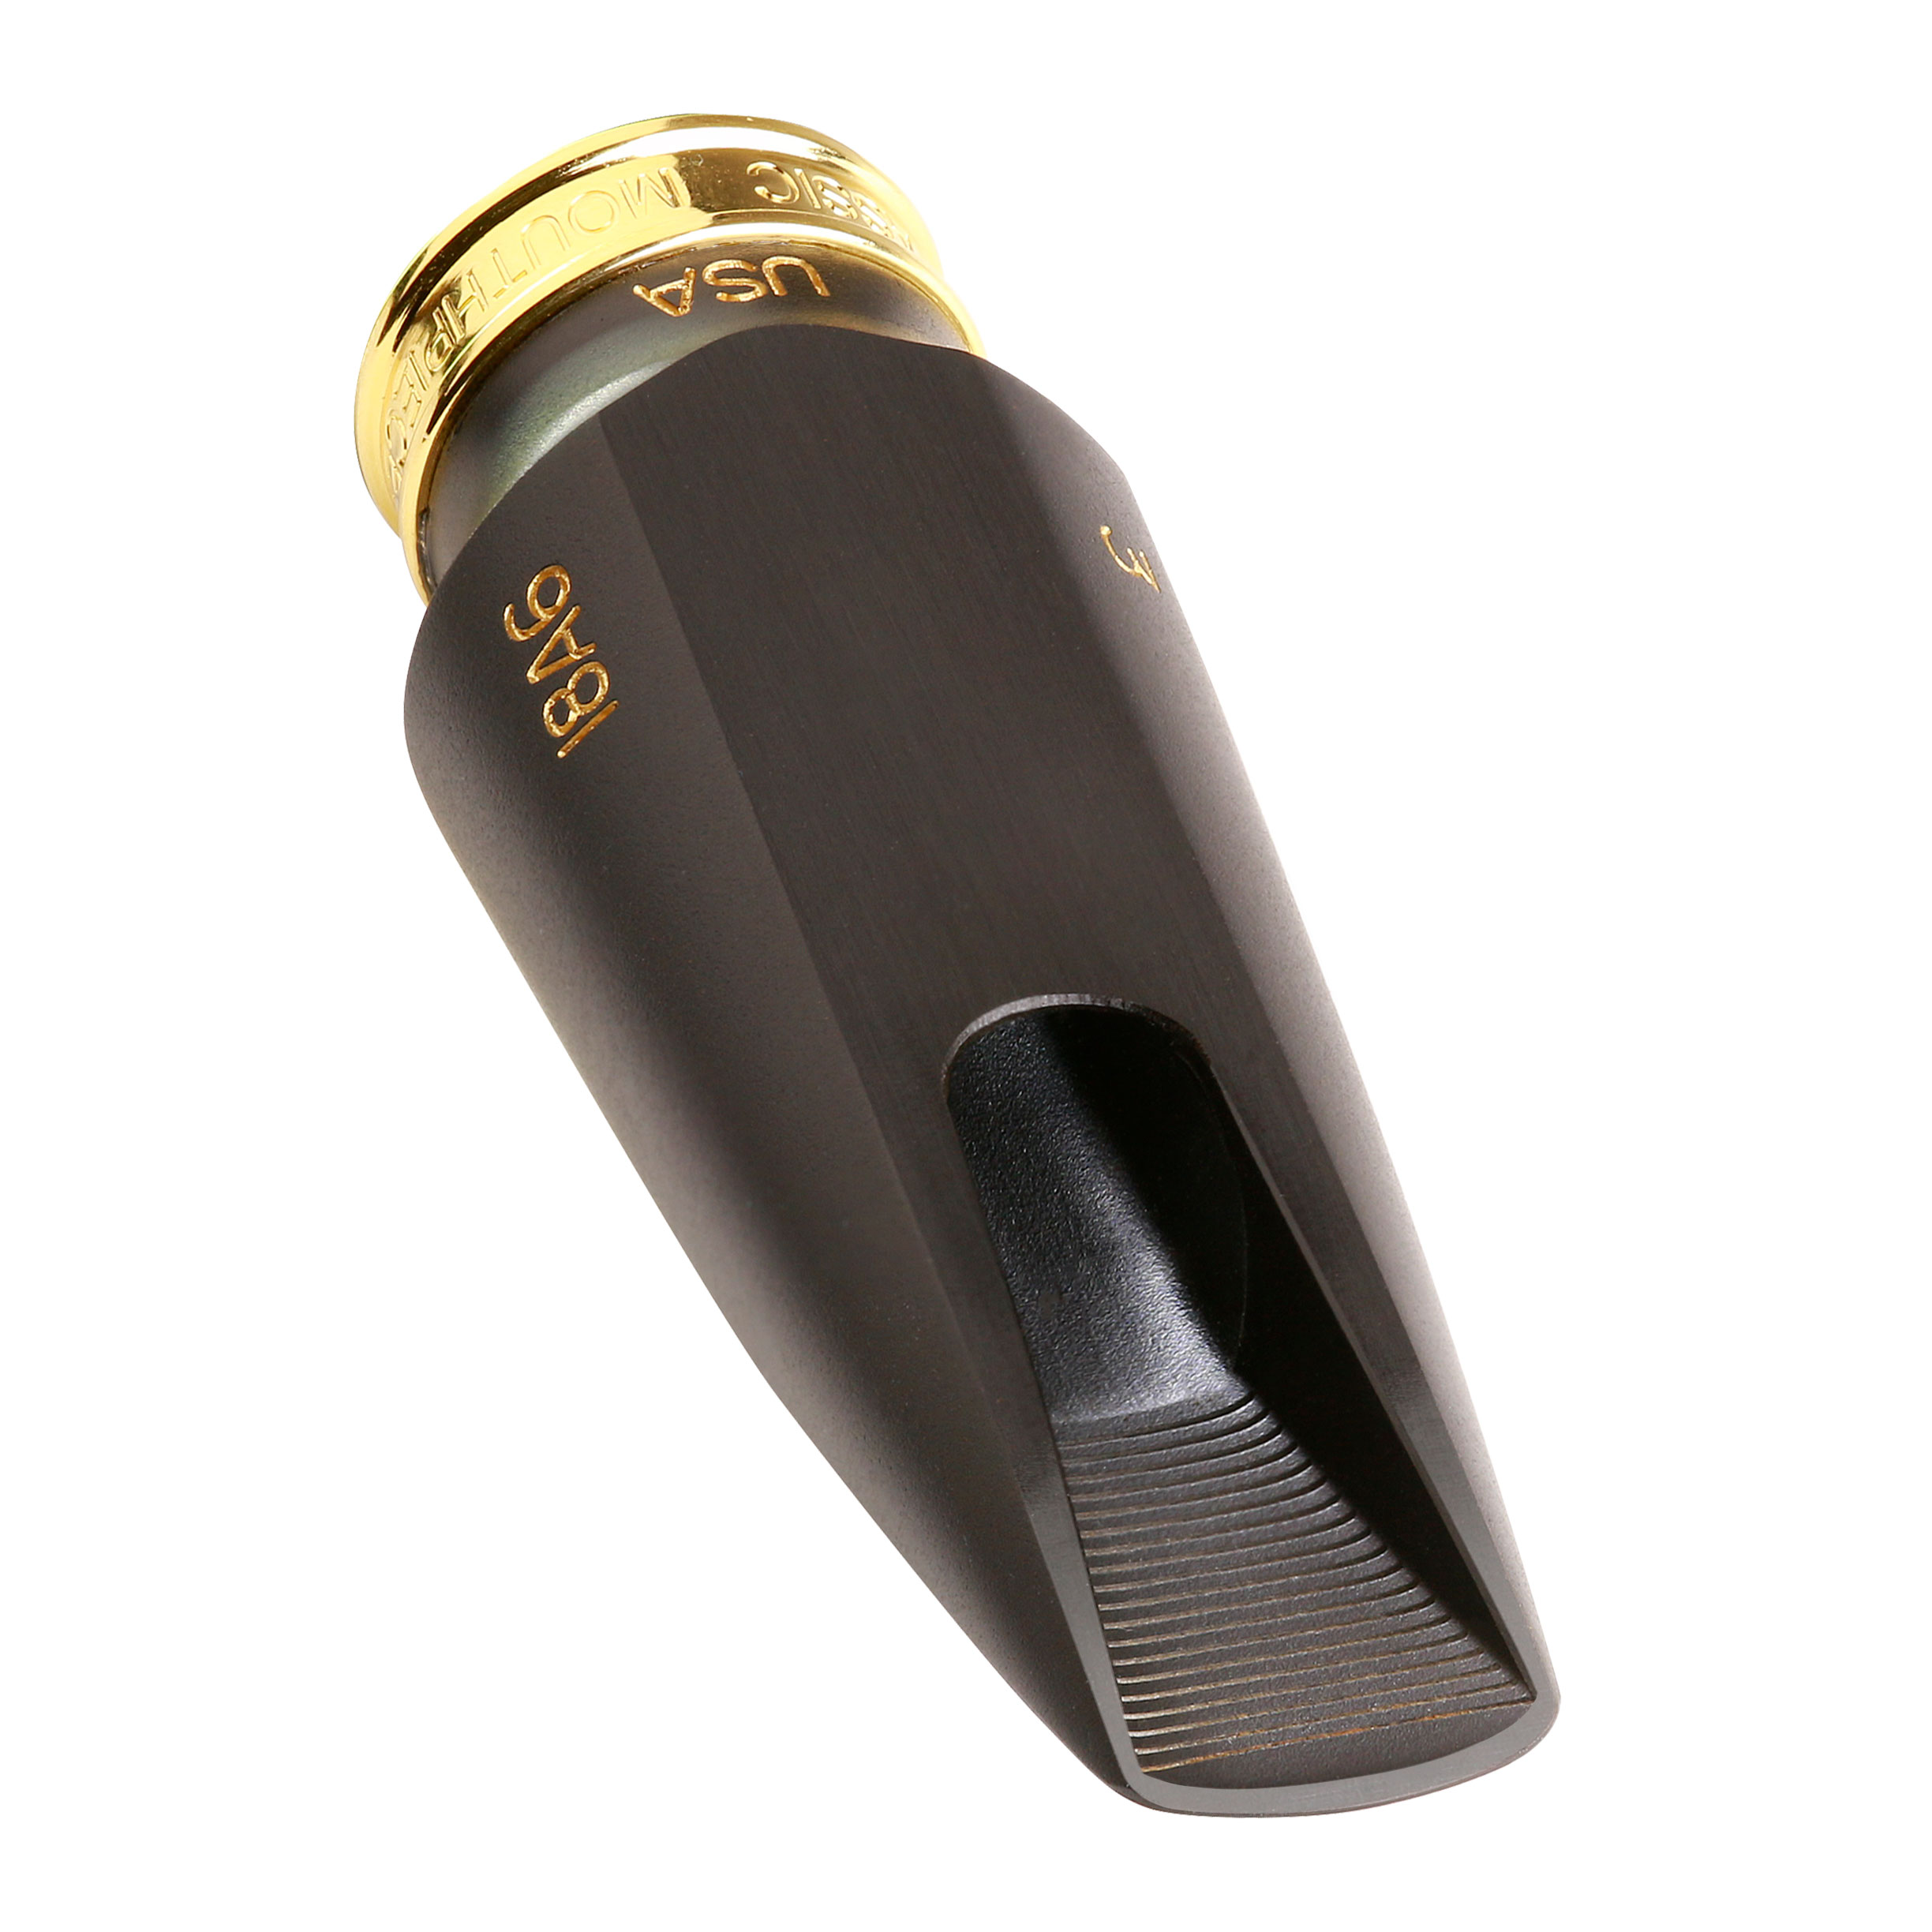 Theo Wanne Water Classical Alto Saxophone Mouthpiece Review